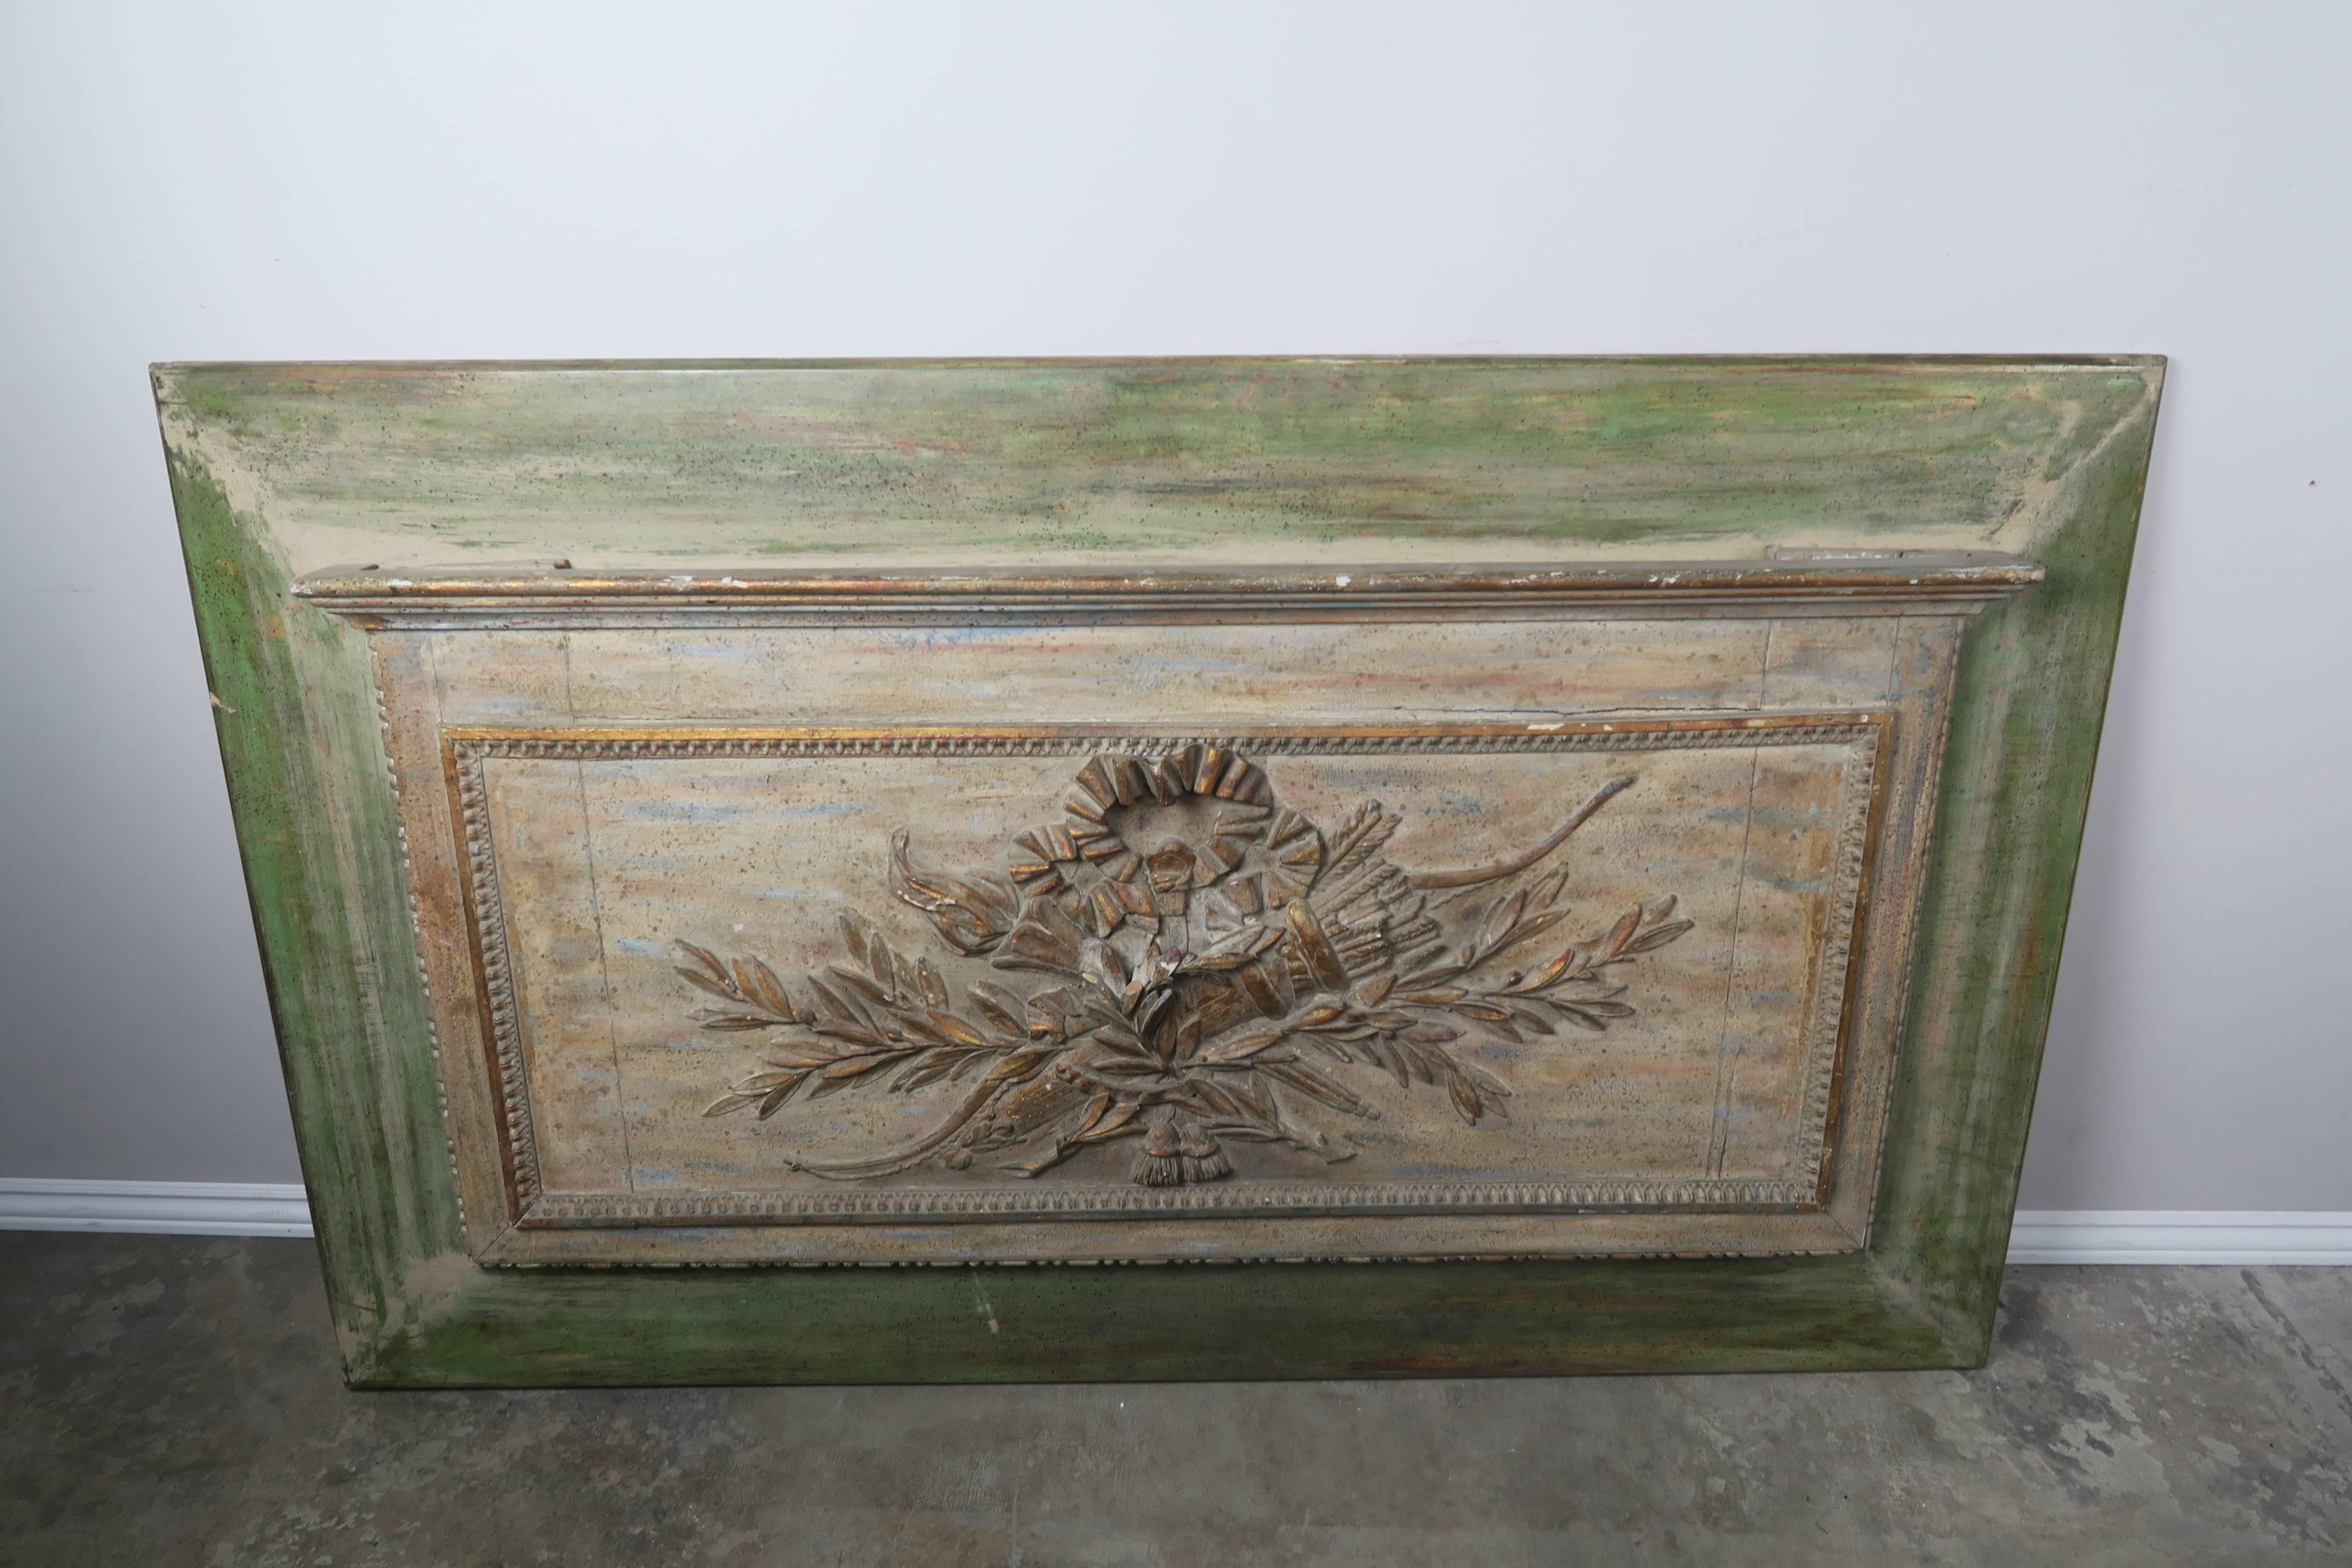 French carved wood Louis XV style painted panel depicting crossed torches, laurel leaves, bows and tassels. Soft green and cream colored painted finish with hints of gold leaf throughout.